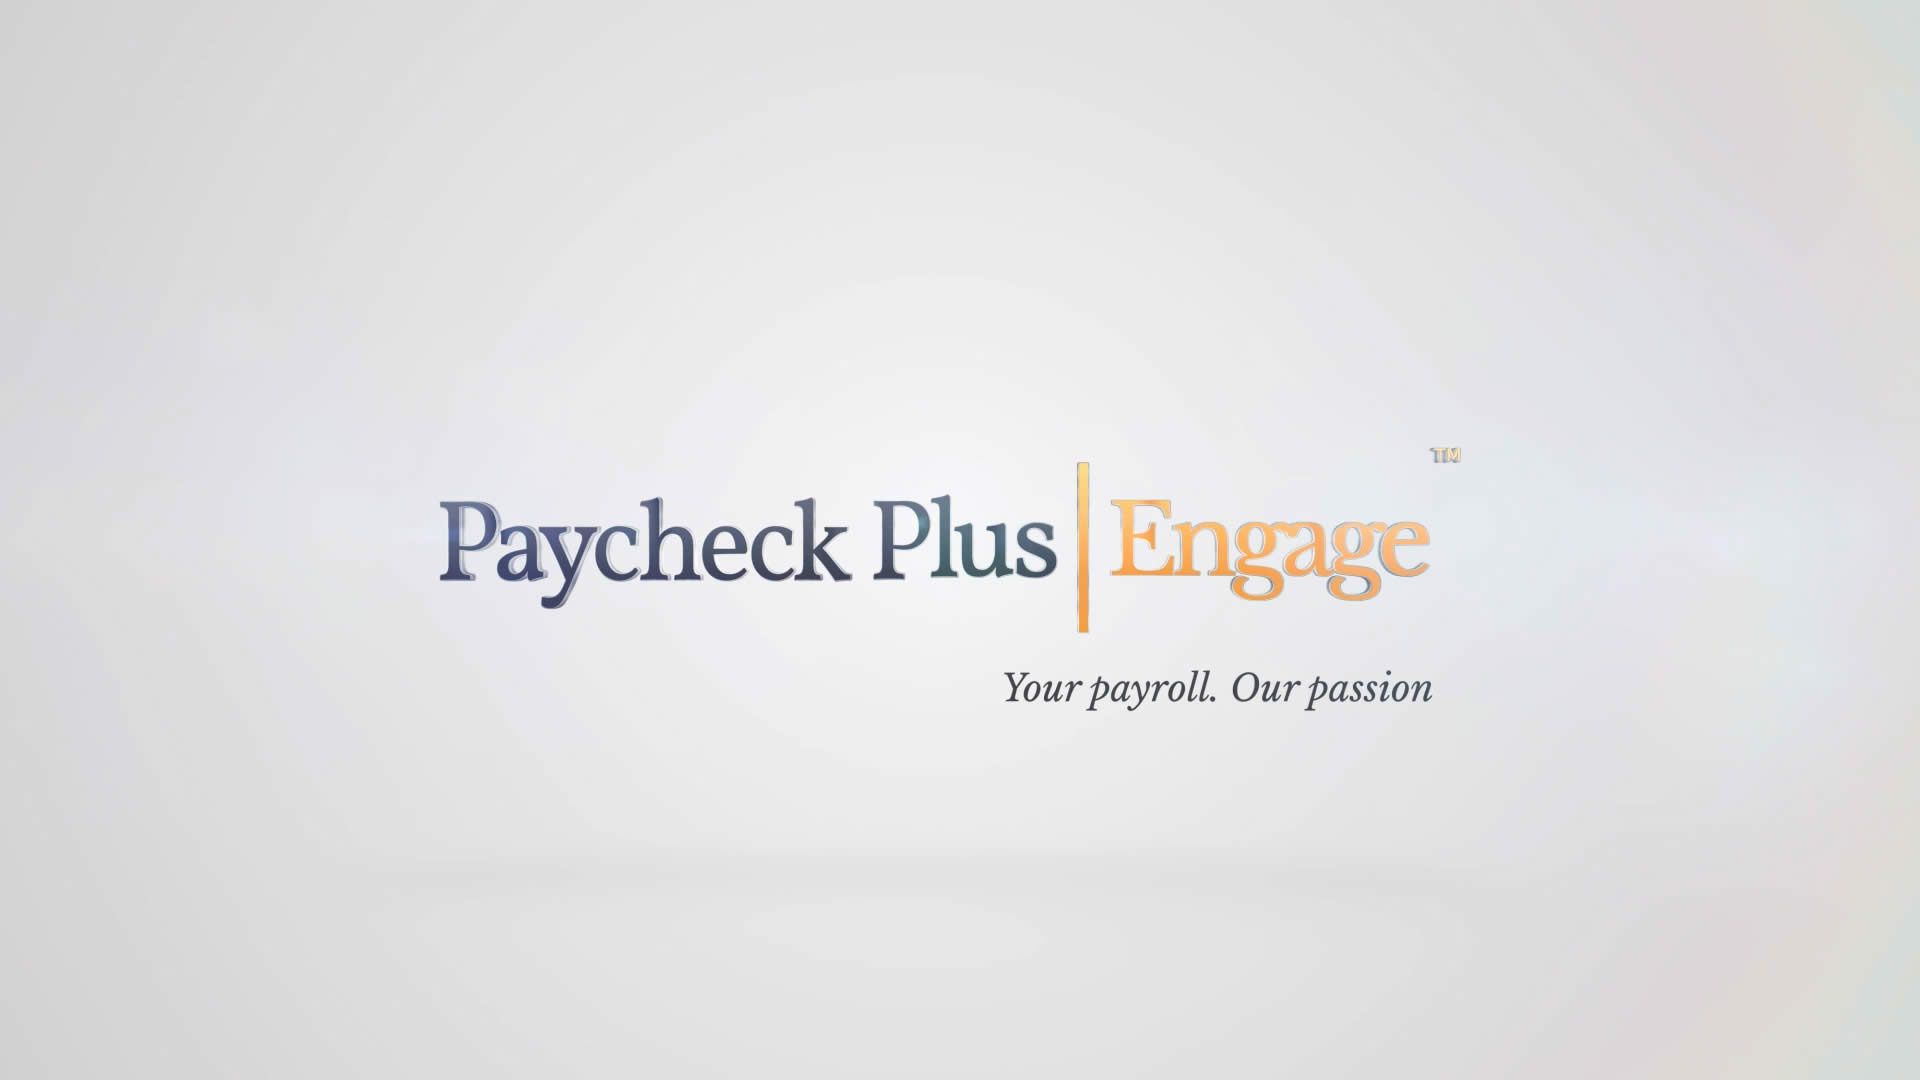 Paycheck Plus Engage - Payroll Software - Paycheck Plus